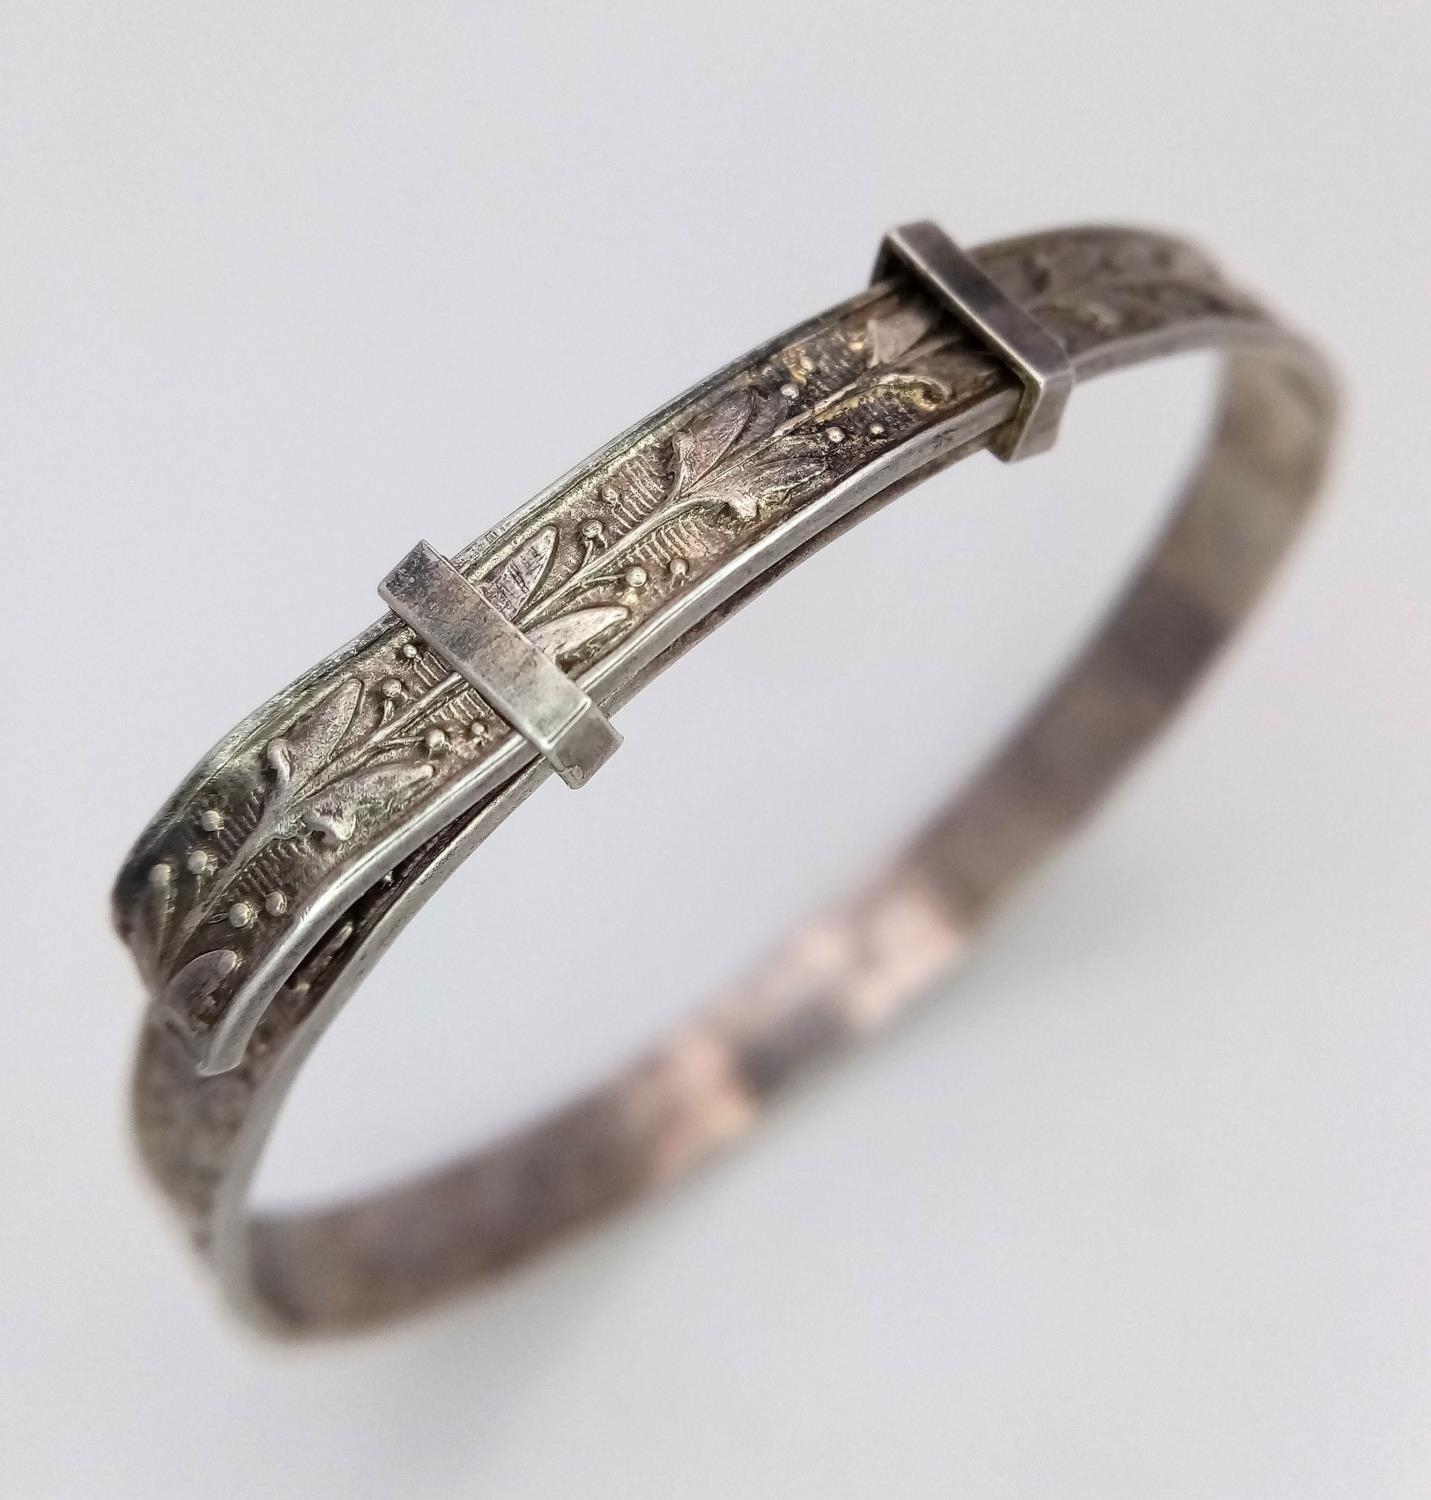 A Silver Victorian Child's Bangle. 4.2cm diameter, 6.14g weight. - Image 3 of 6